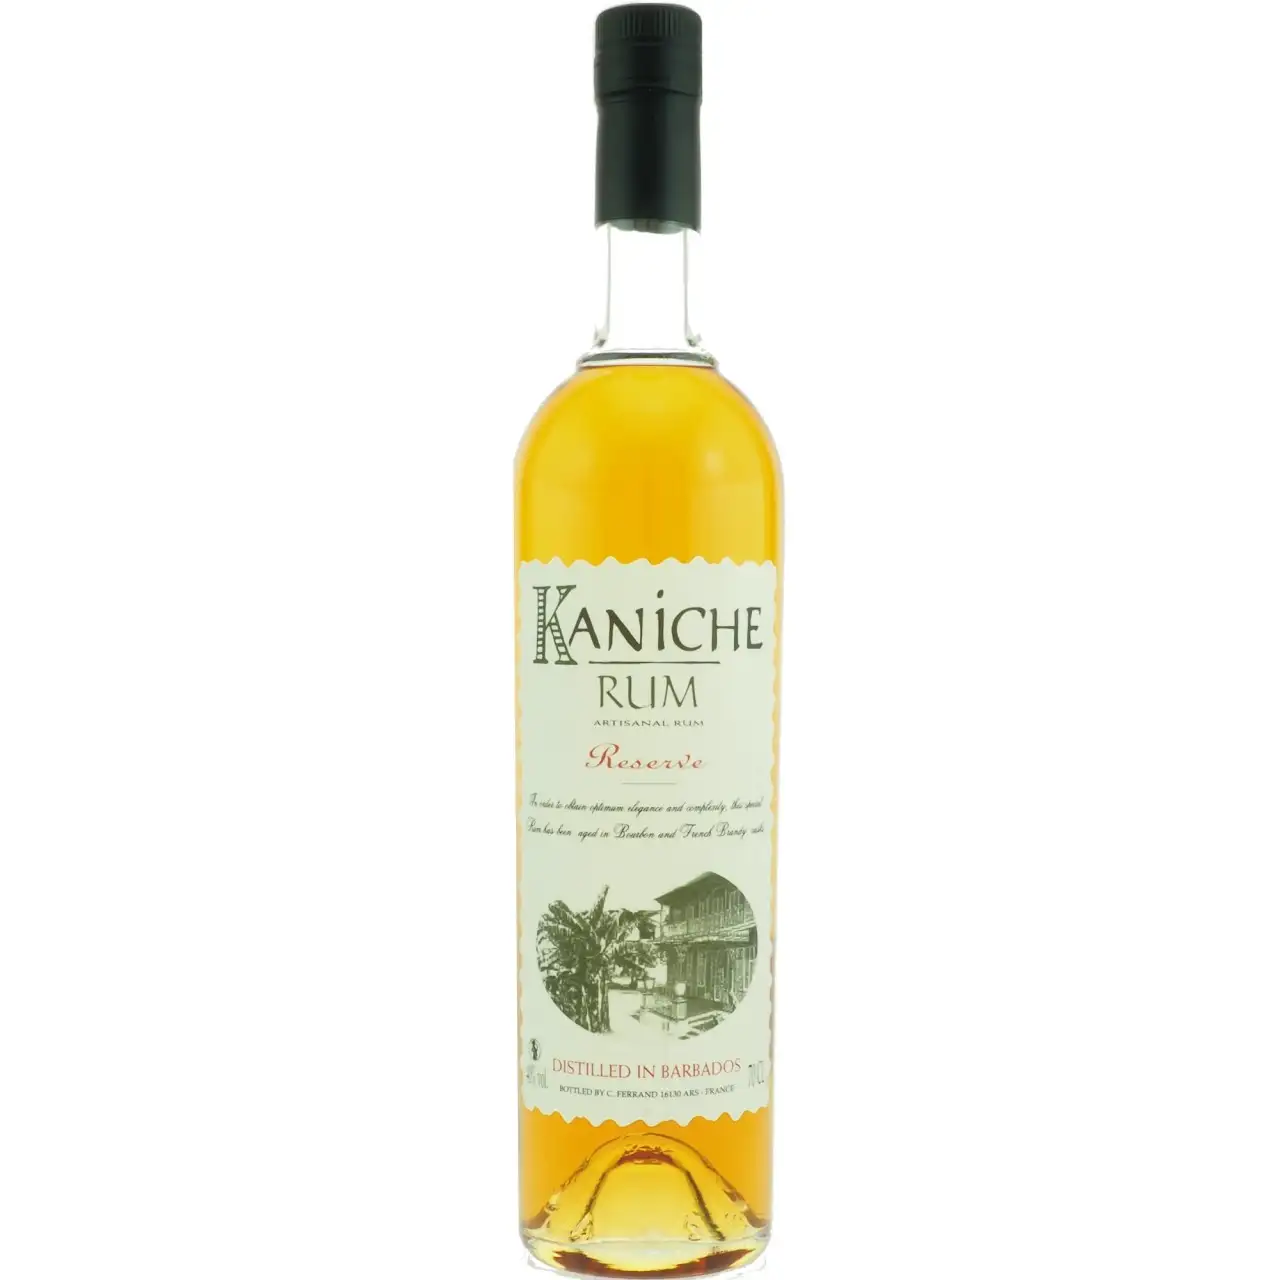 Image of the front of the bottle of the rum Kaniché Réserve